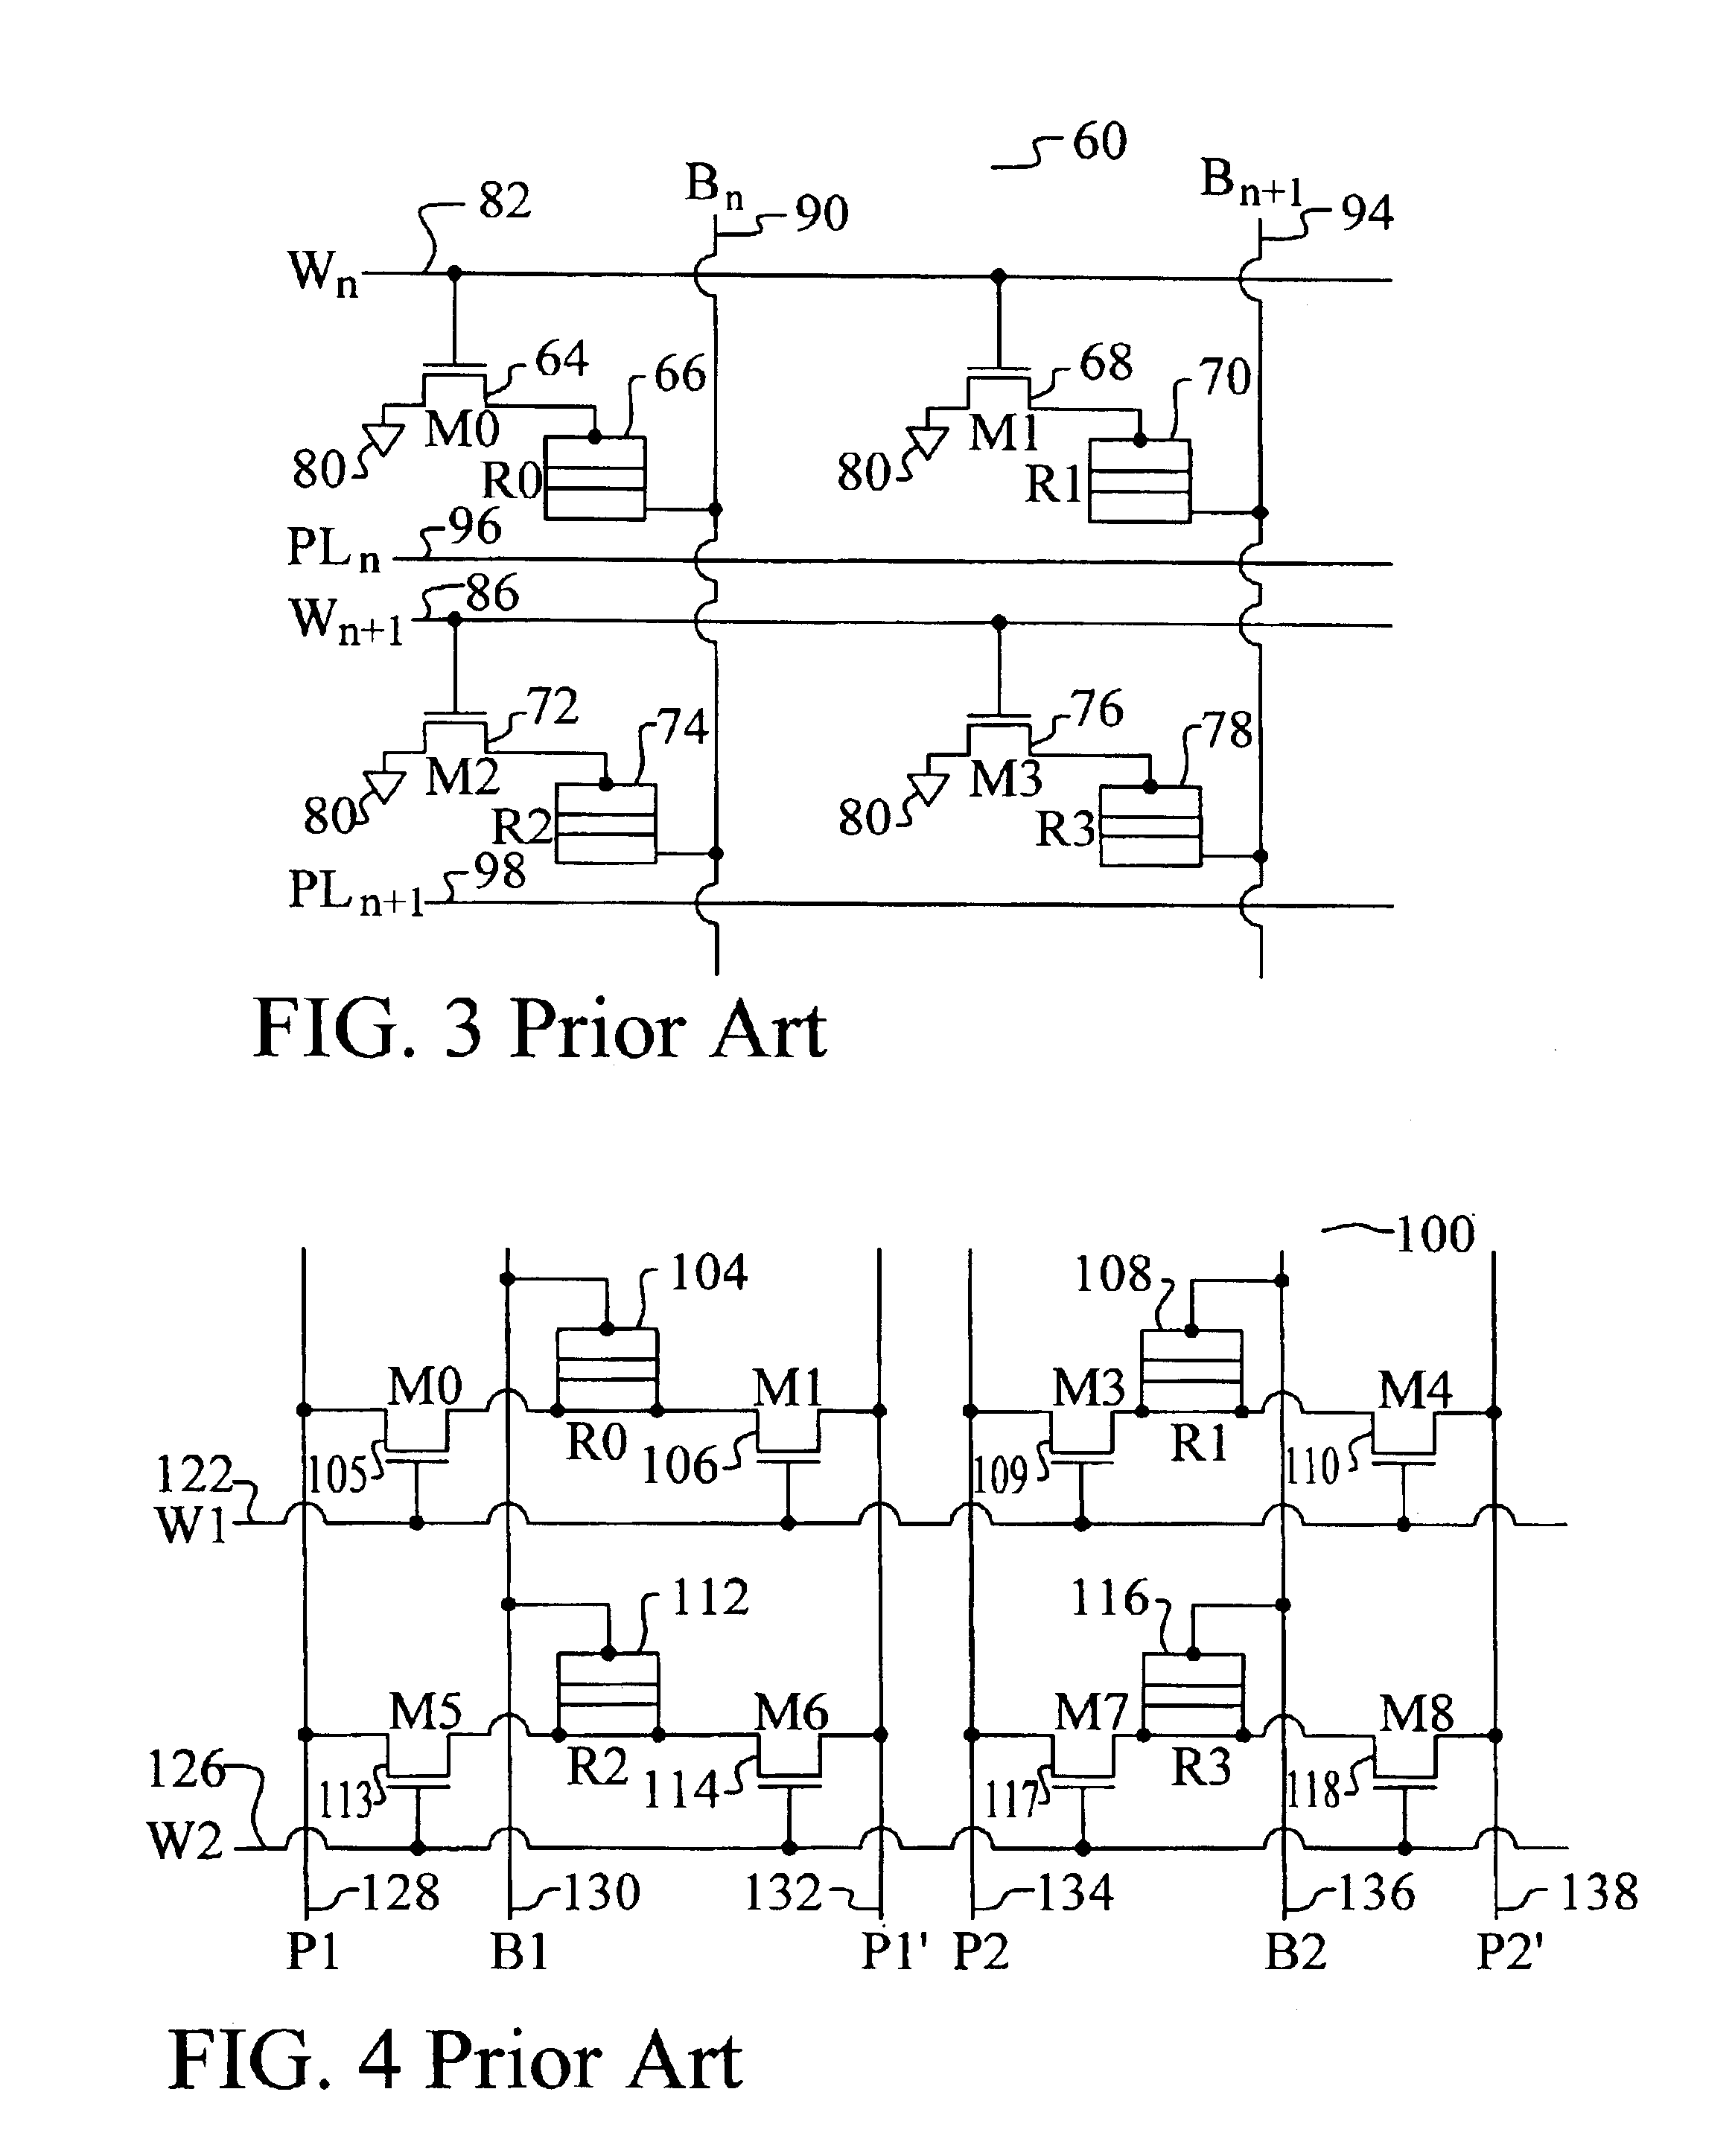 Magnetic RAM cell device and array architecture